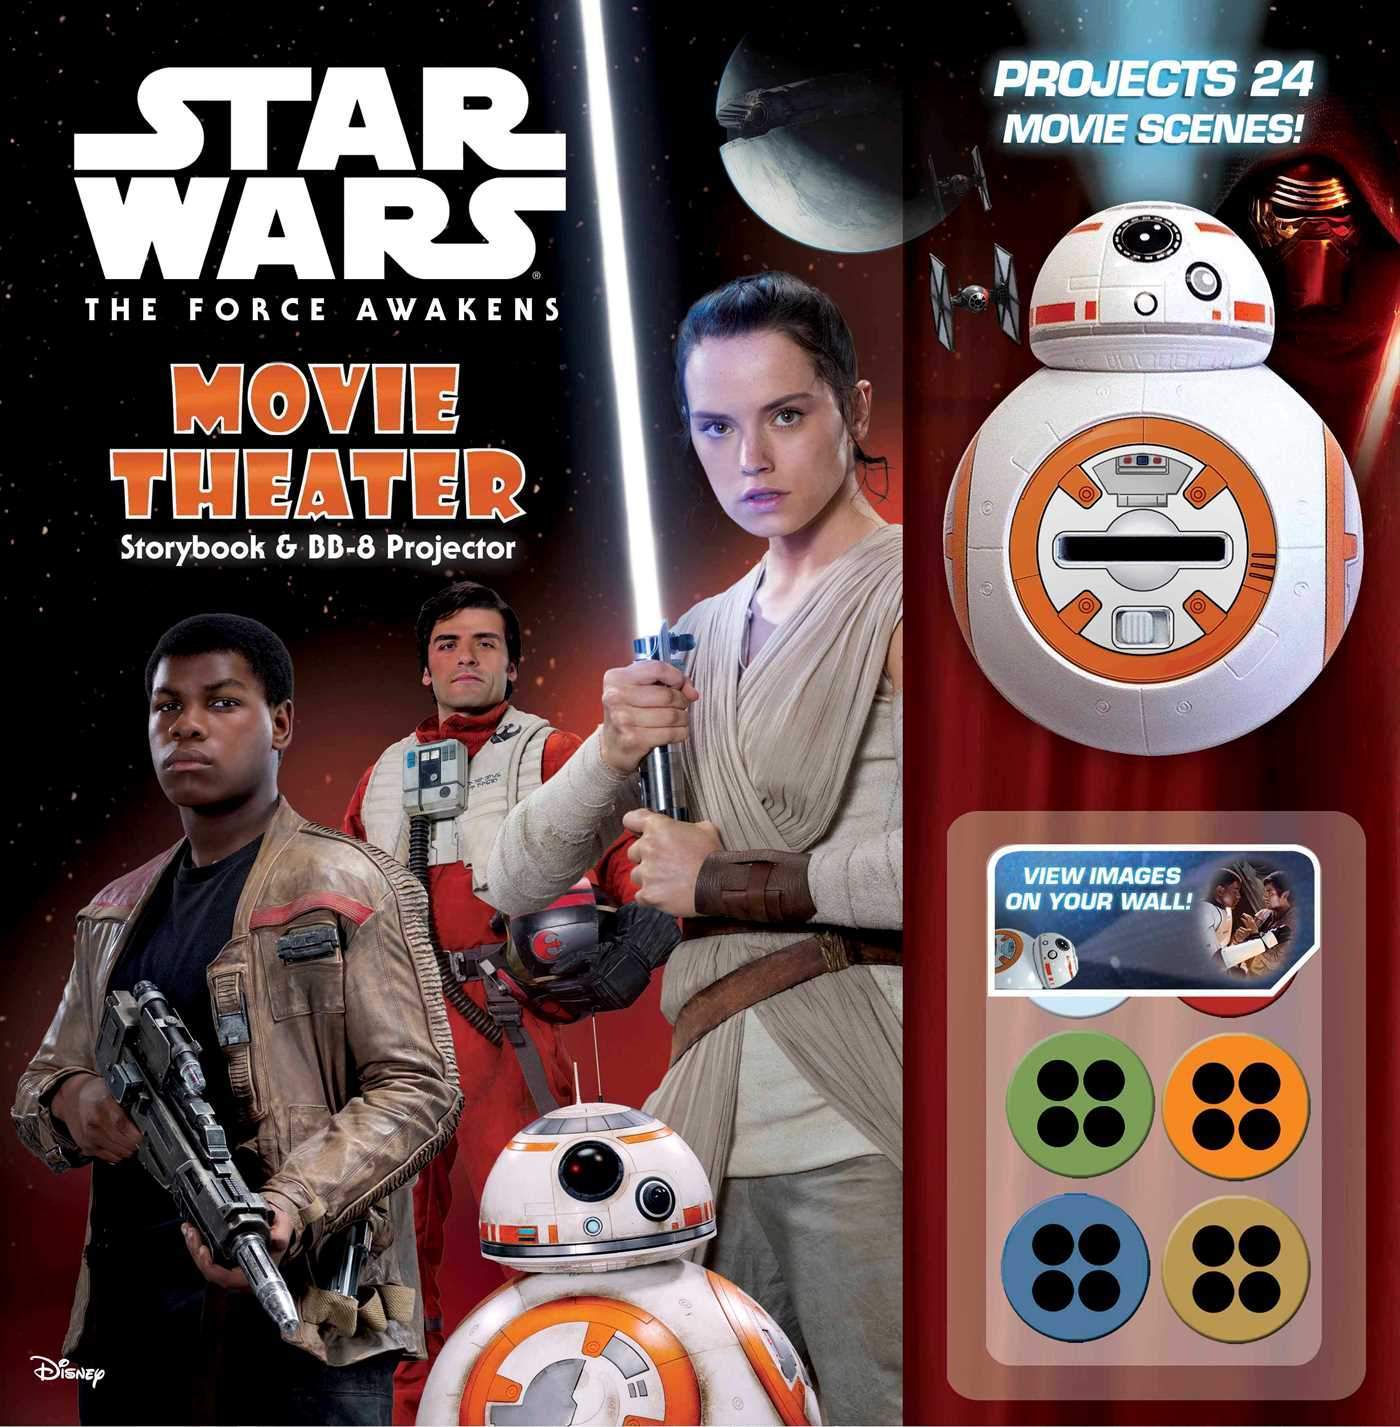 Star Wars: The Force Awakens - Movie Theater Storybook